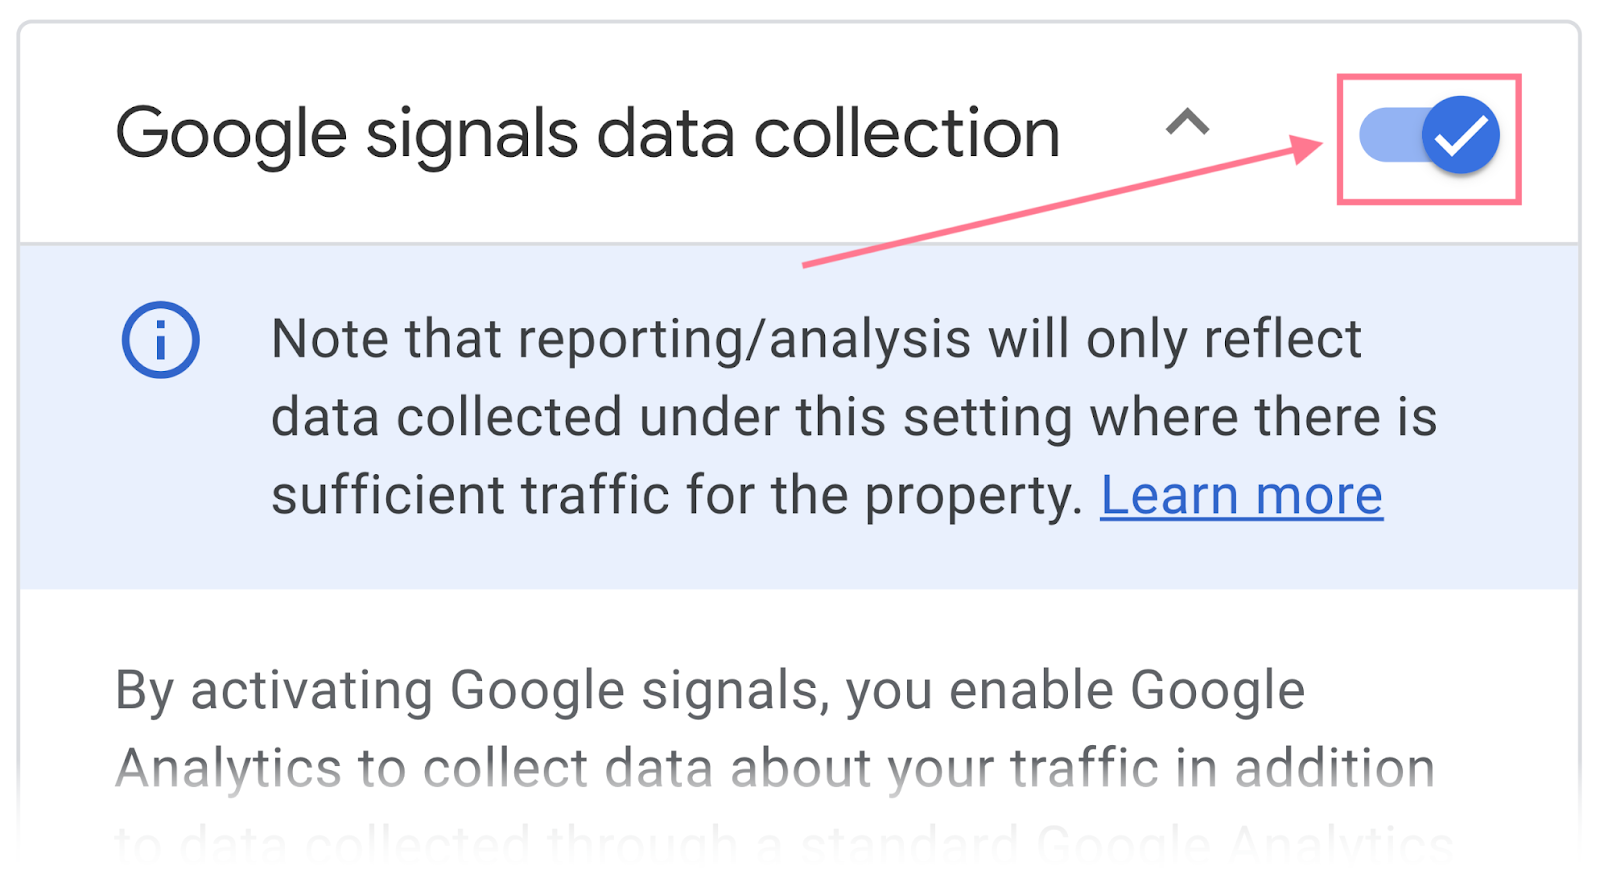 ،w to enable Google signals data collection